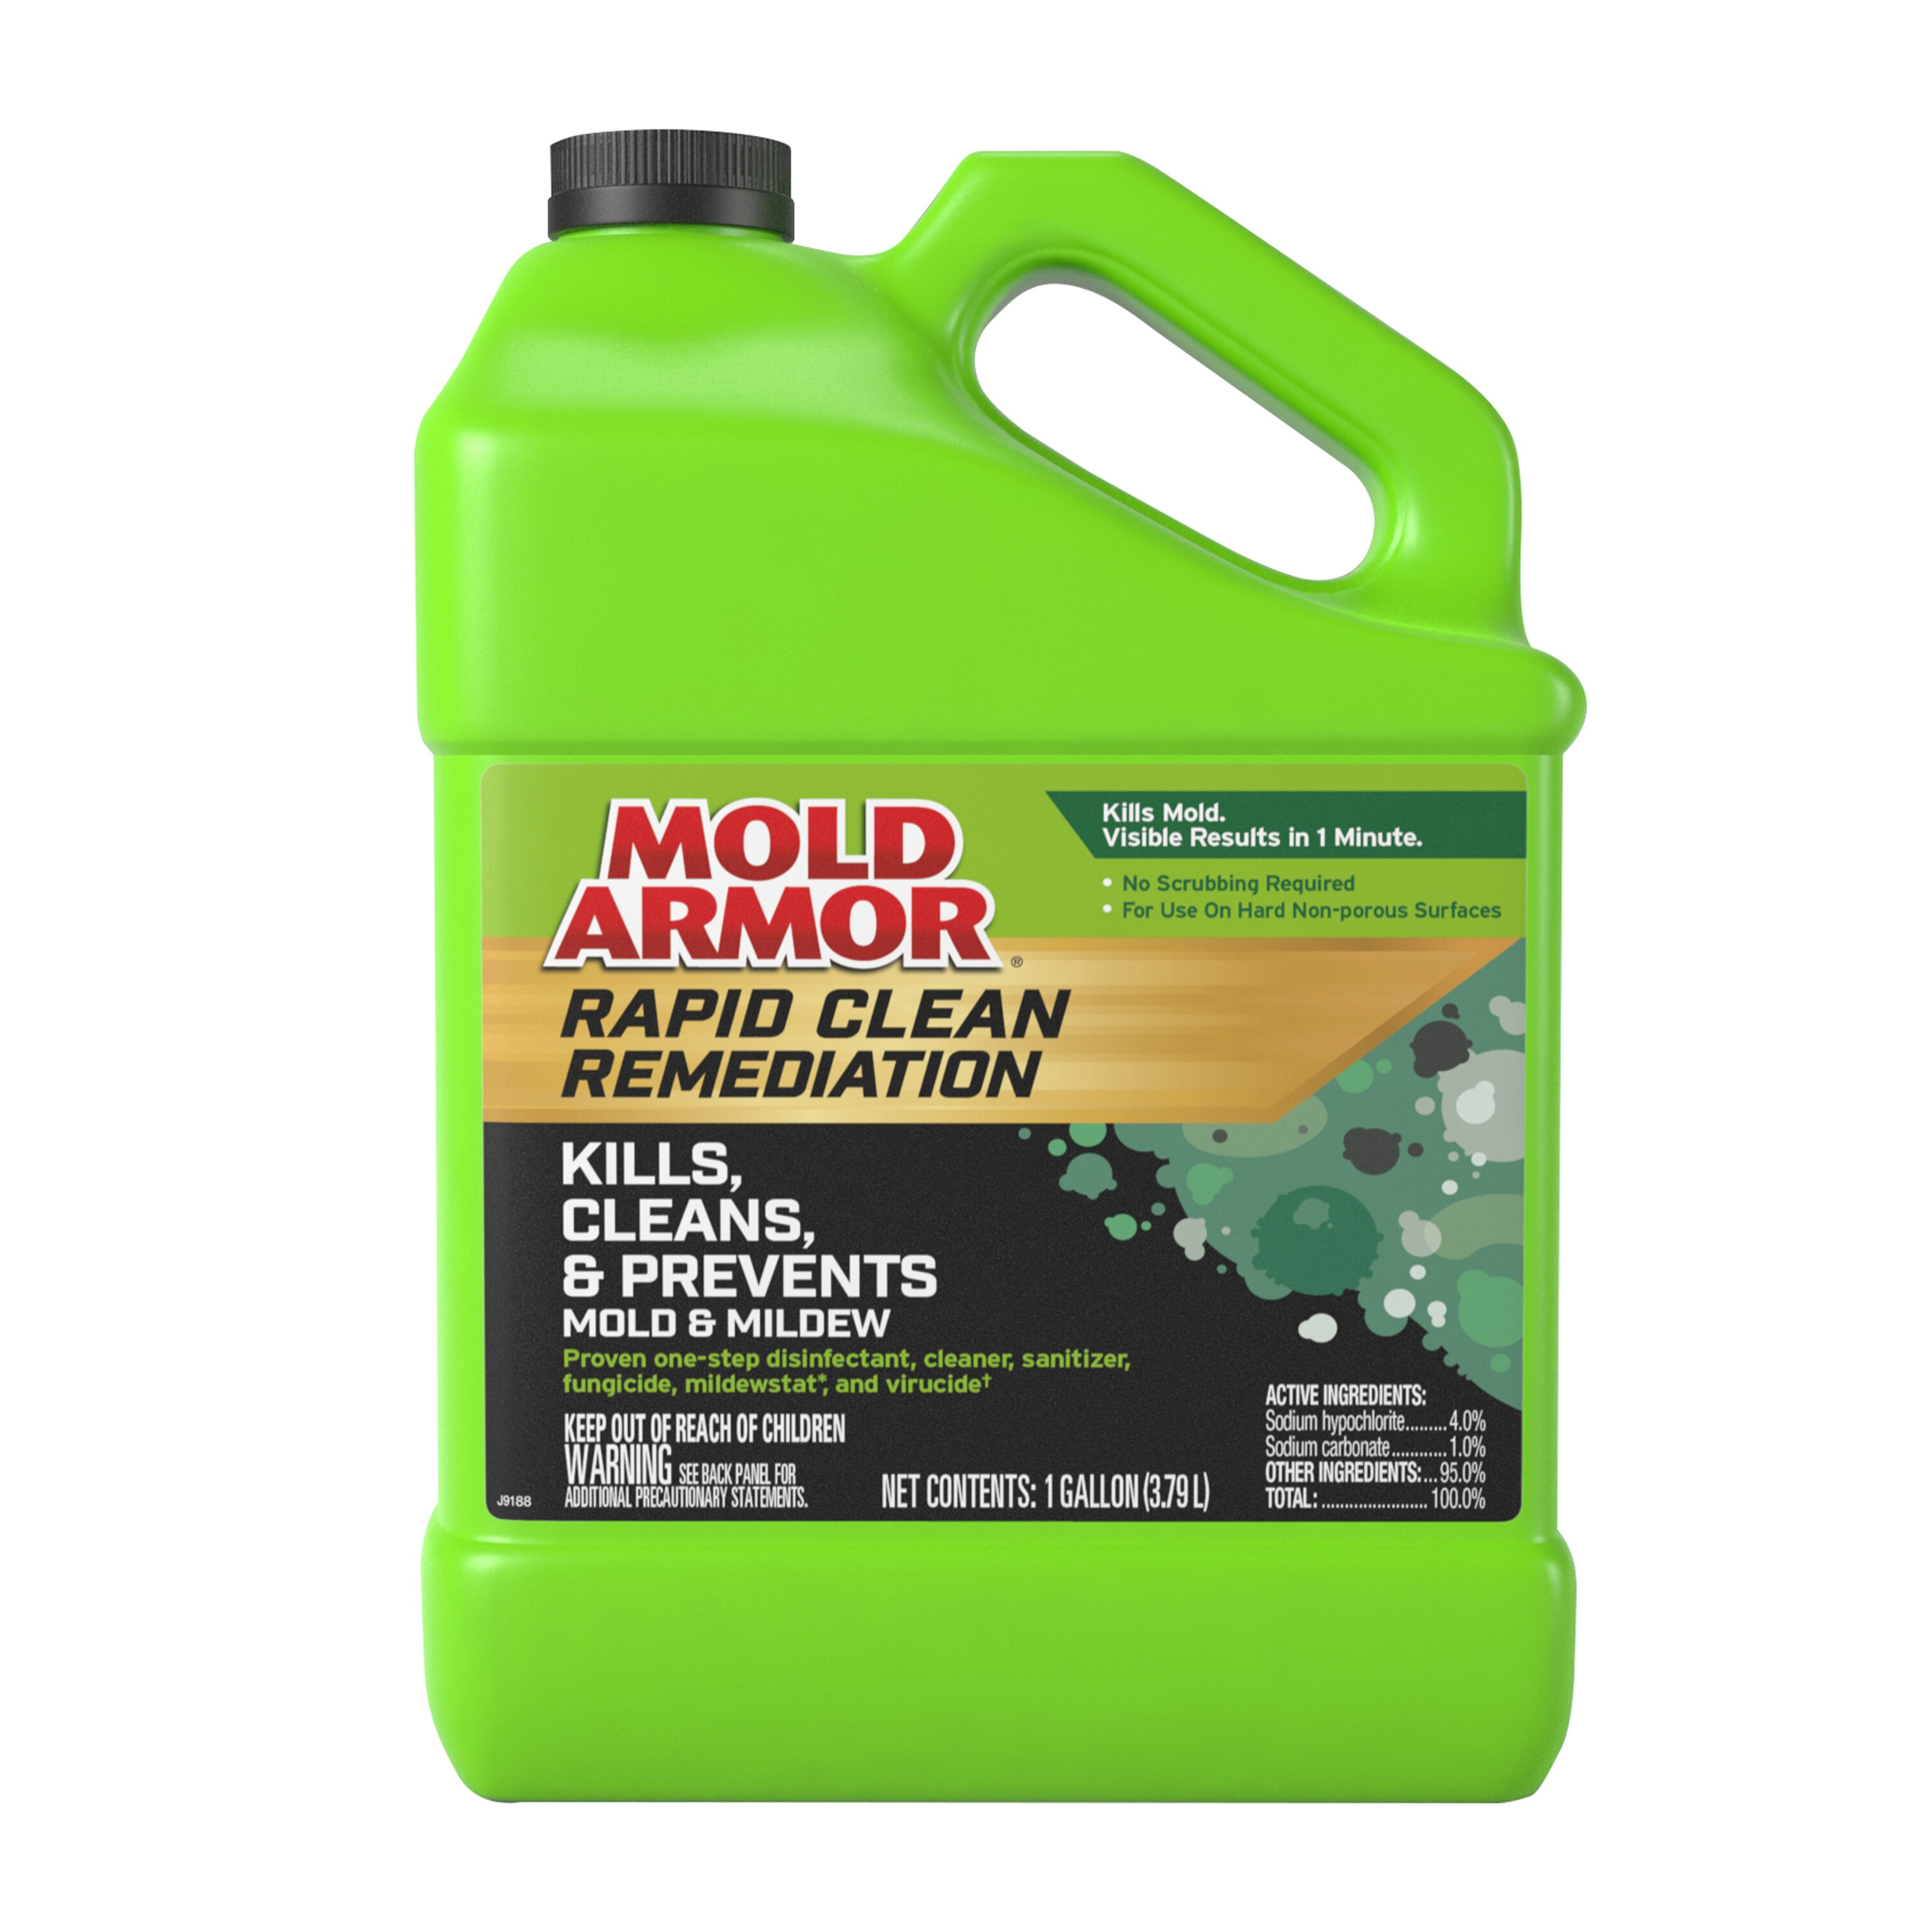 Mold remover Cleaning Supplies at